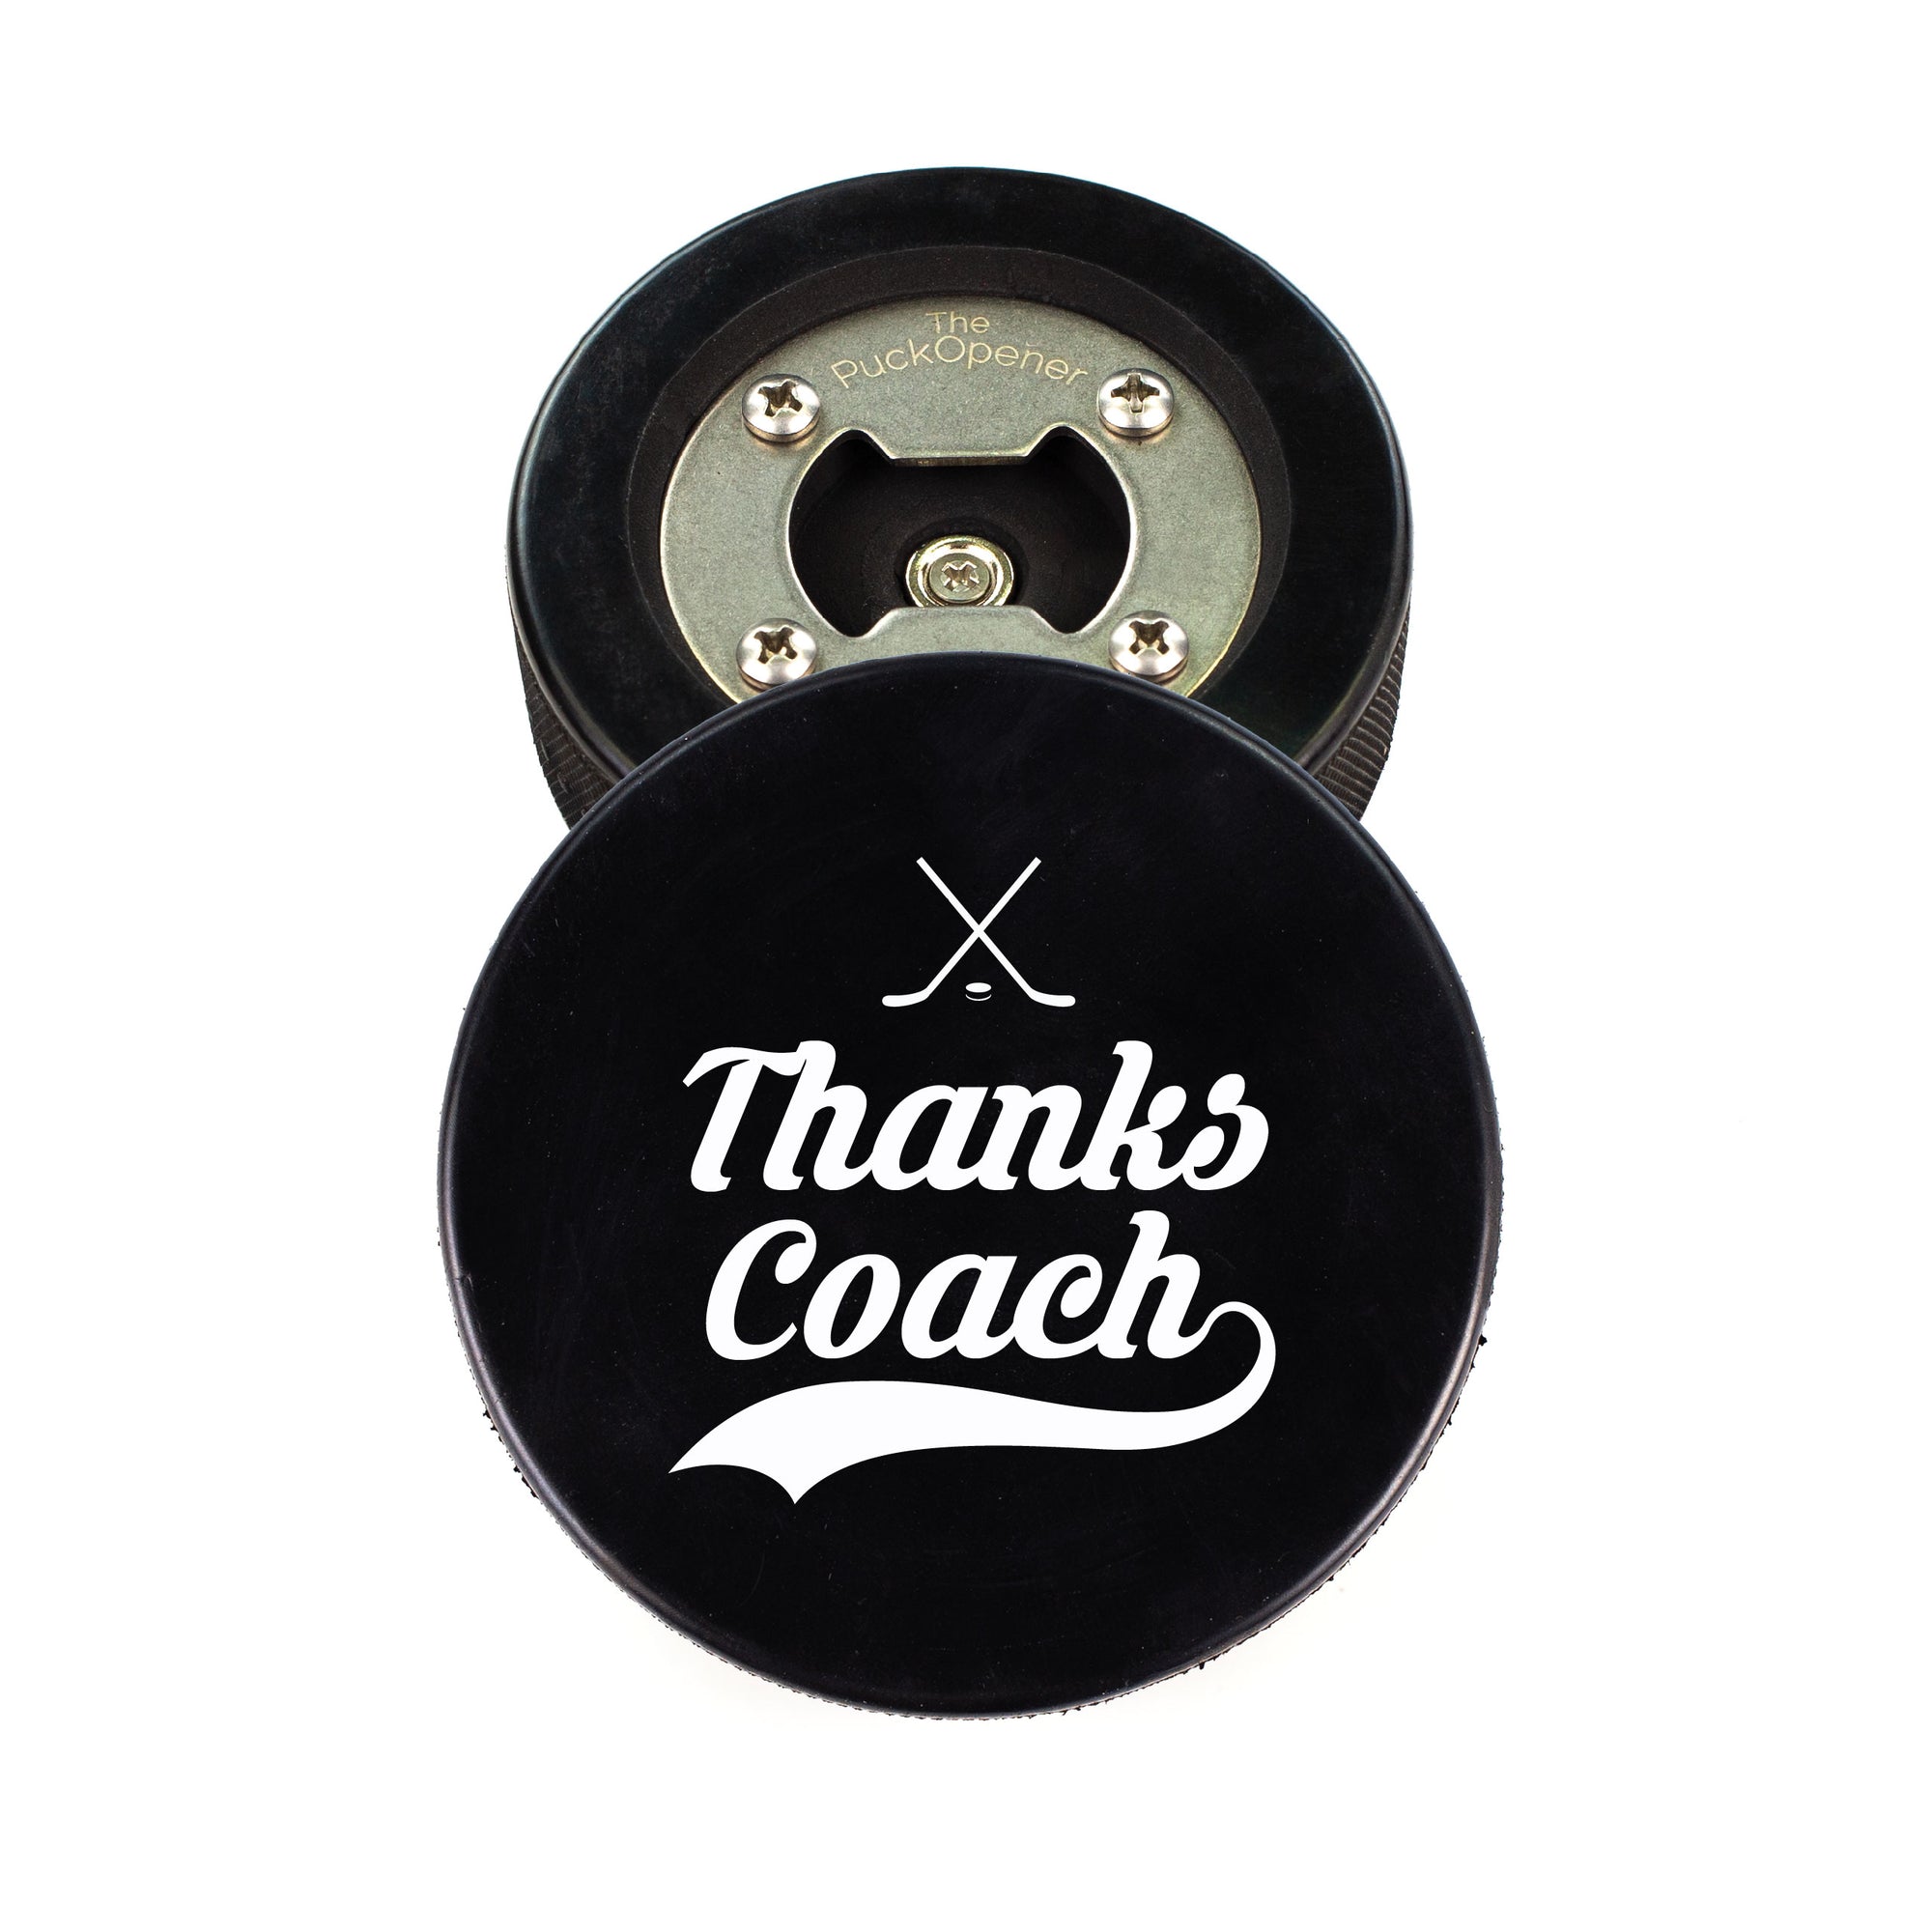 Hockey Puck Bottle Opener with Thanks Coach Design